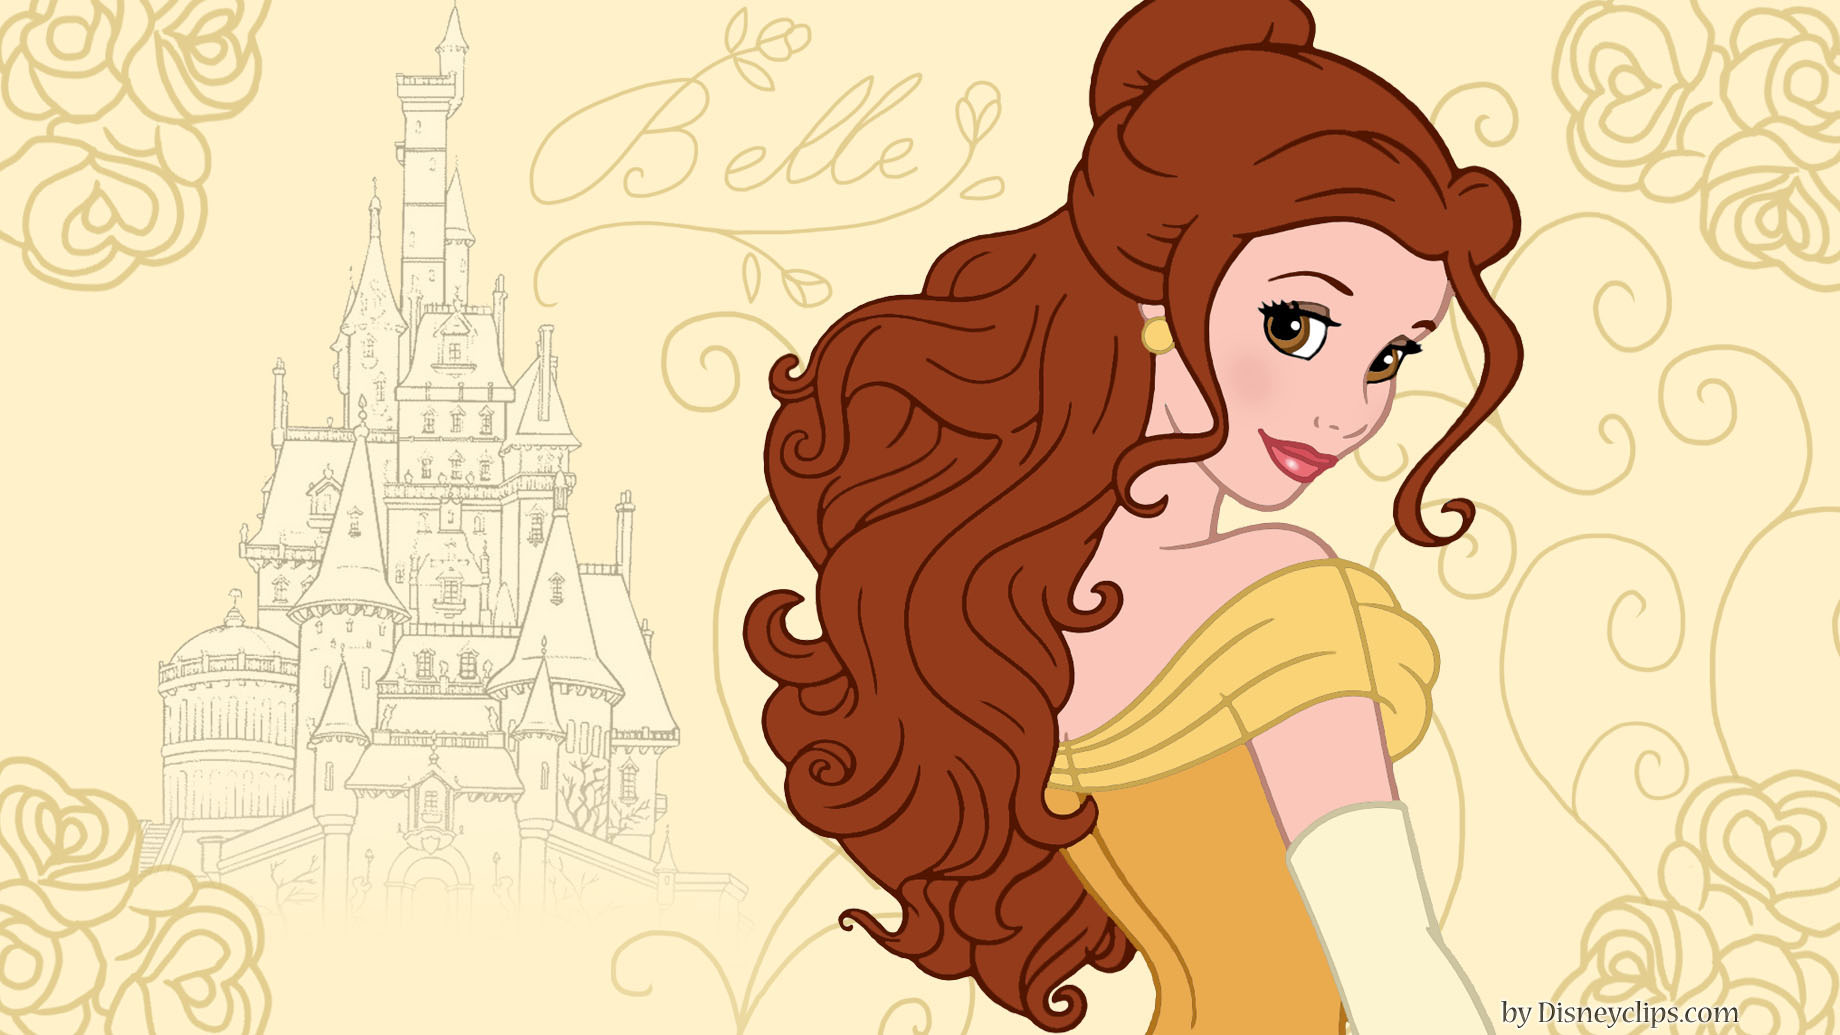 Beauty And The Beast Wallpaper Disneyclips Com